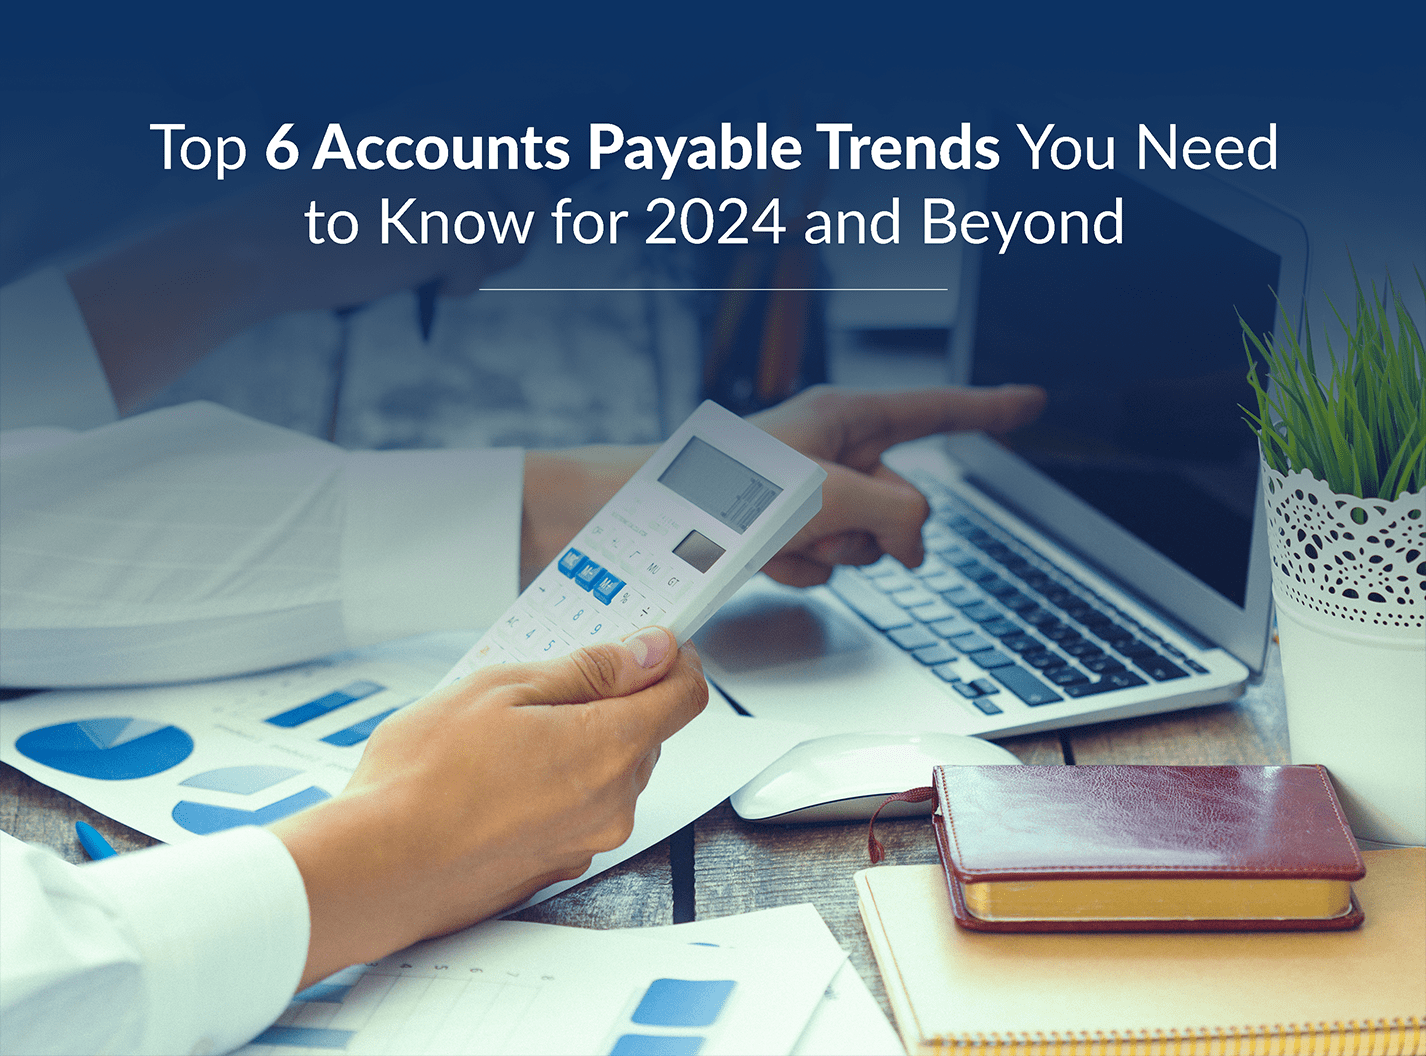 Top 6 Accounts Payable Trends You Need to Know for 2024 and Beyond